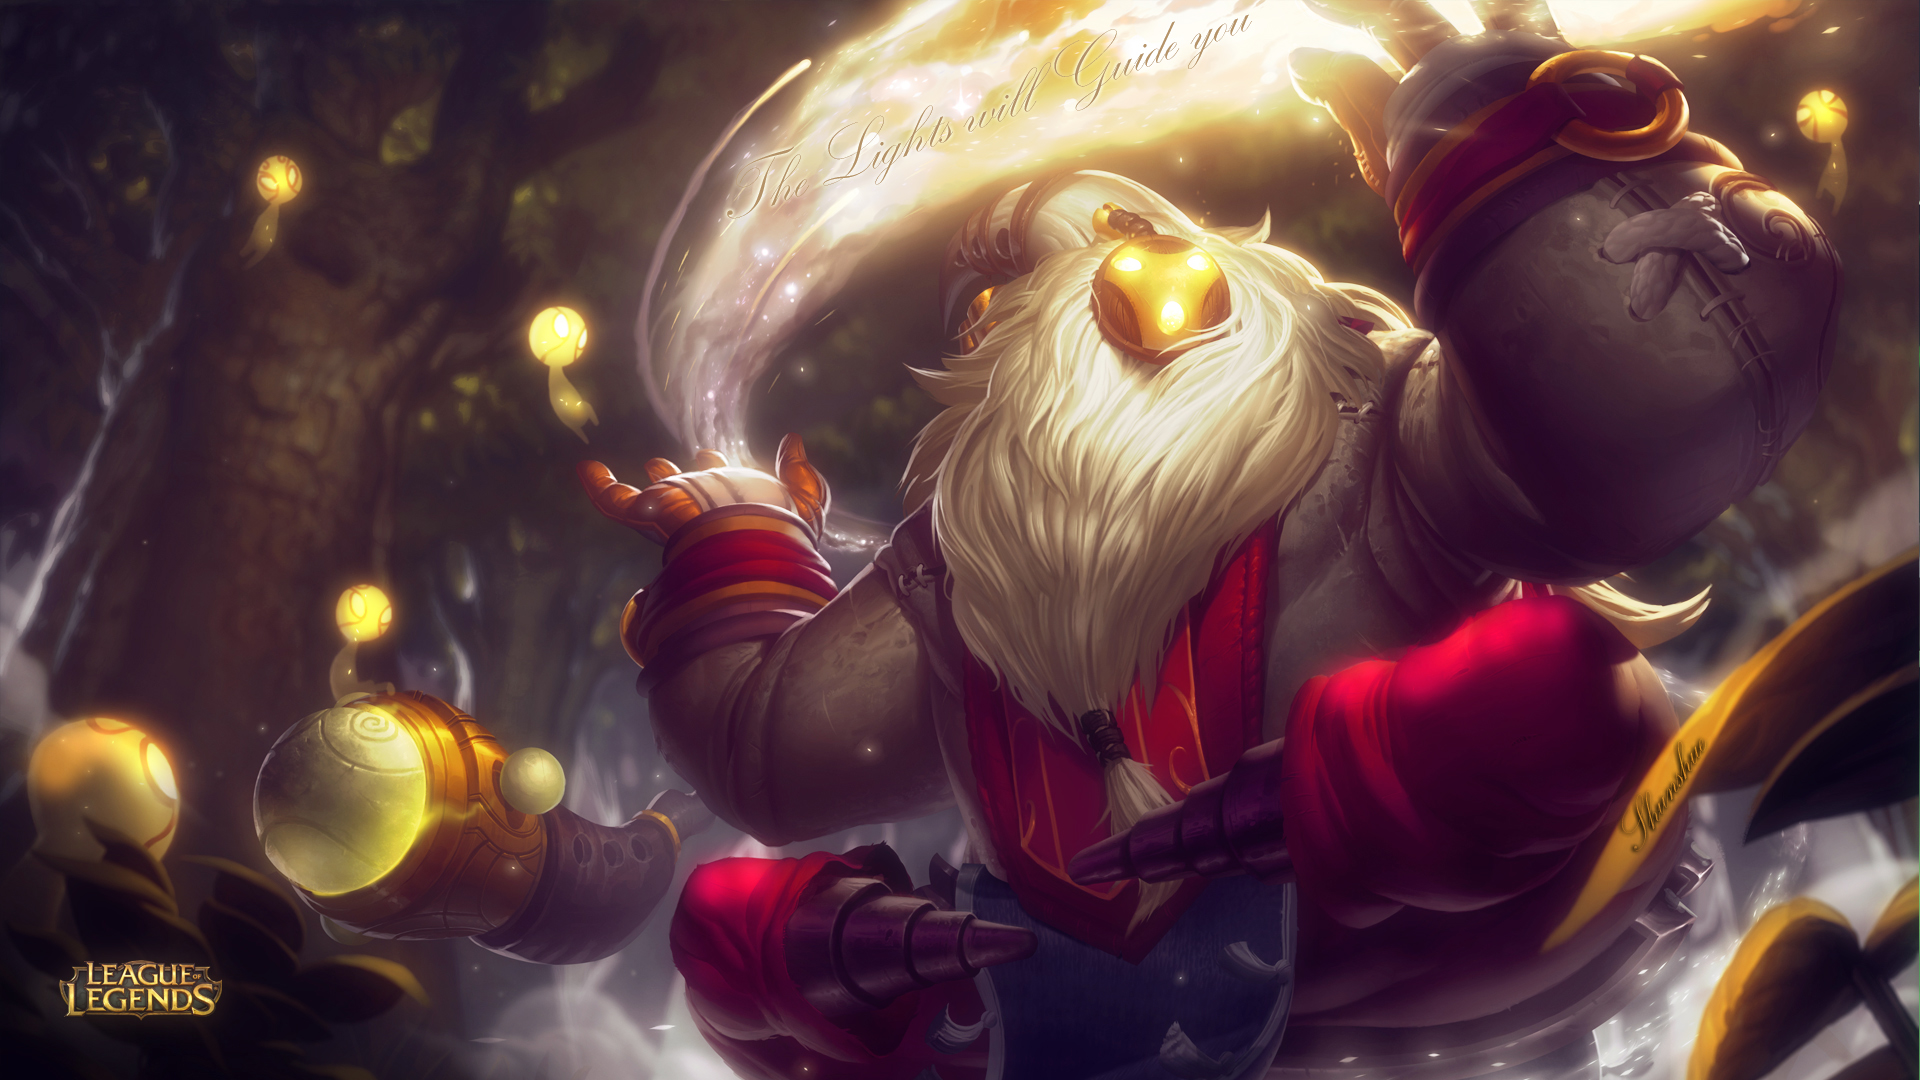 Bard Wallpapers, CK39 HD Wallpapers For Desktop And Mobile